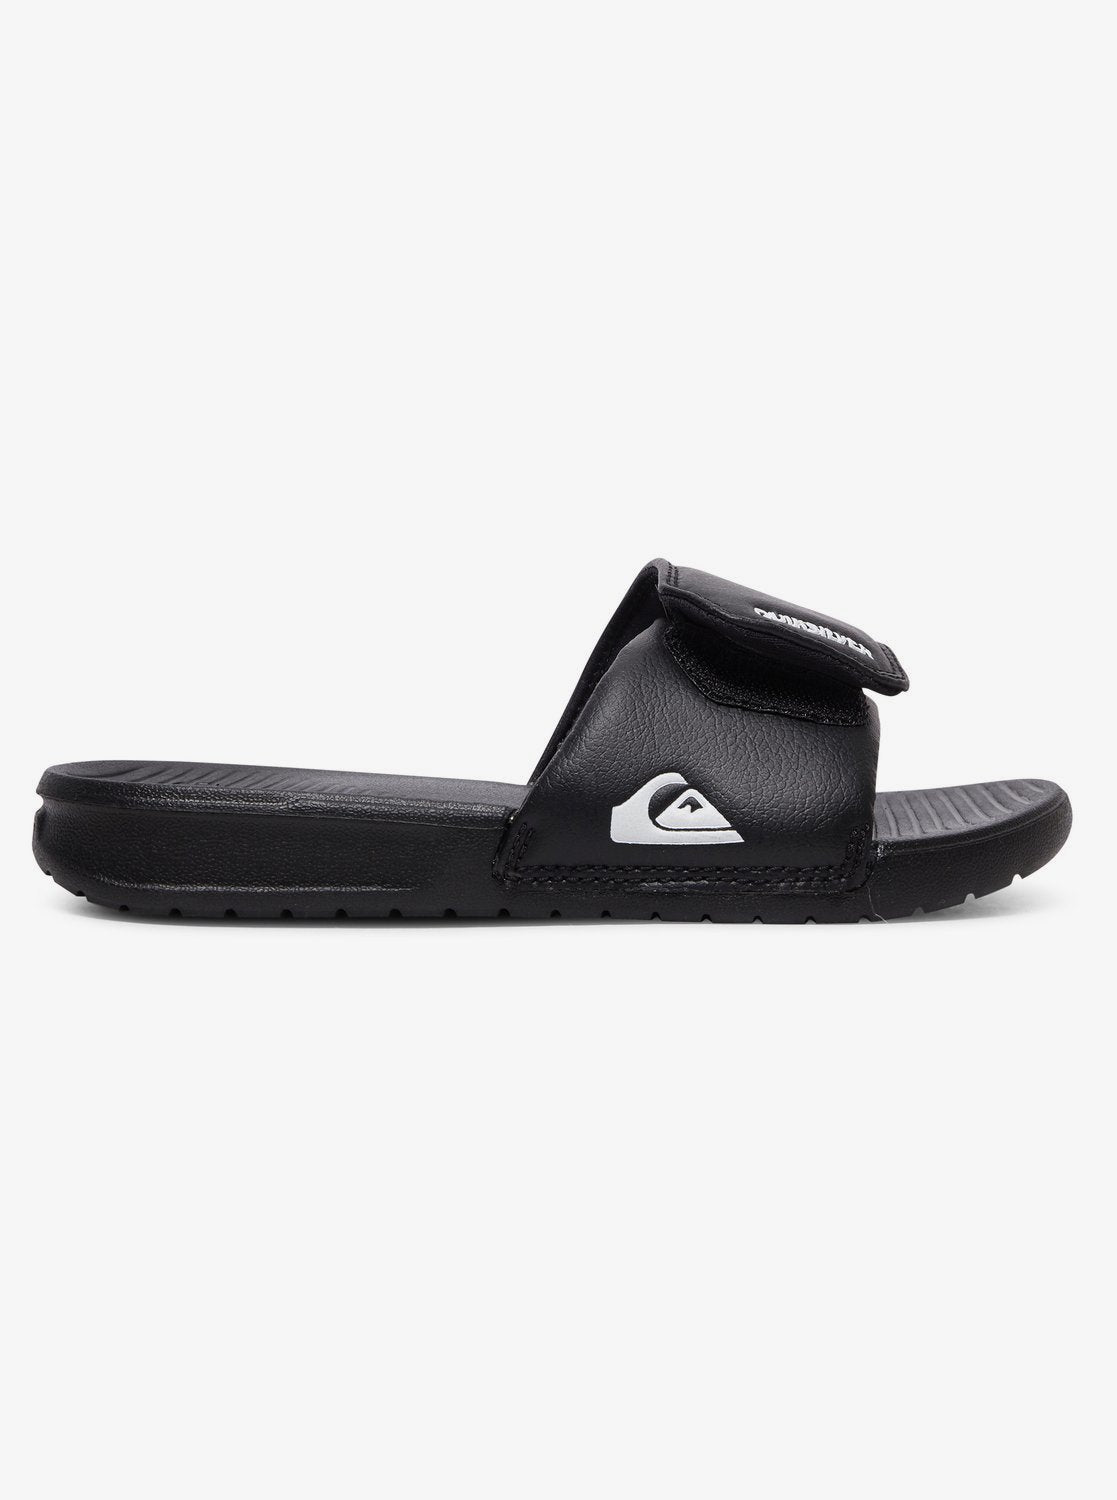 Quiksilver Boys' Bright Coast Adjustable Sandals - Mountain Kids Outfitters: Black Color - White Background  side view